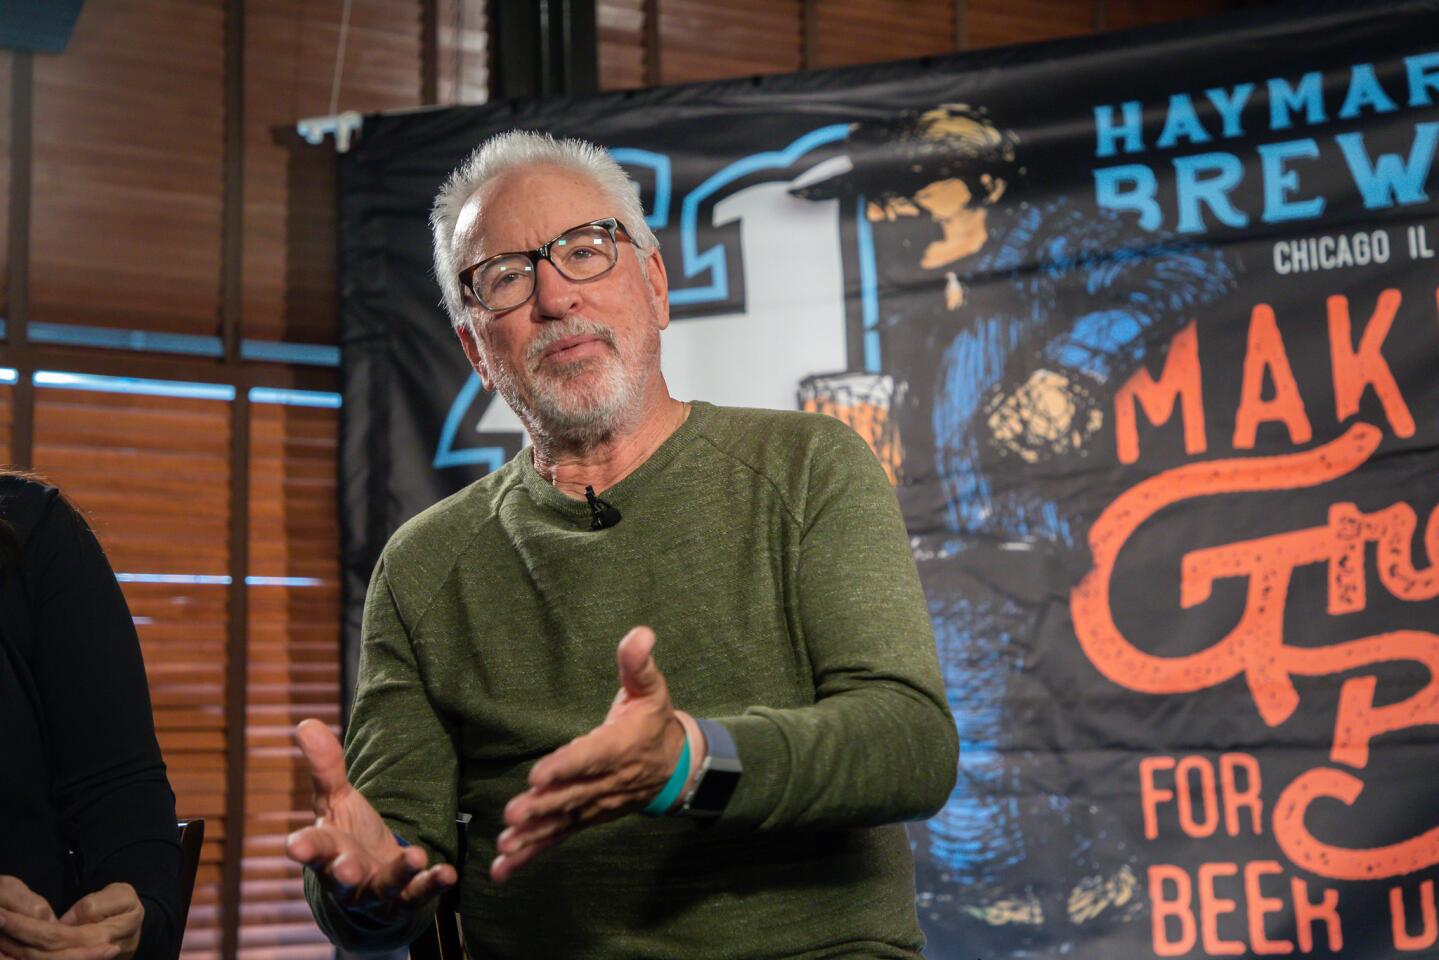 Joe Maddon launches his new beer Try Not to Suck lager at Haymarket Pub & Brewery in Chicago on Tuesday, April 23, 2019. The beer benefits his charity, Respect 90, and Chicago based Rags of Honor 1.